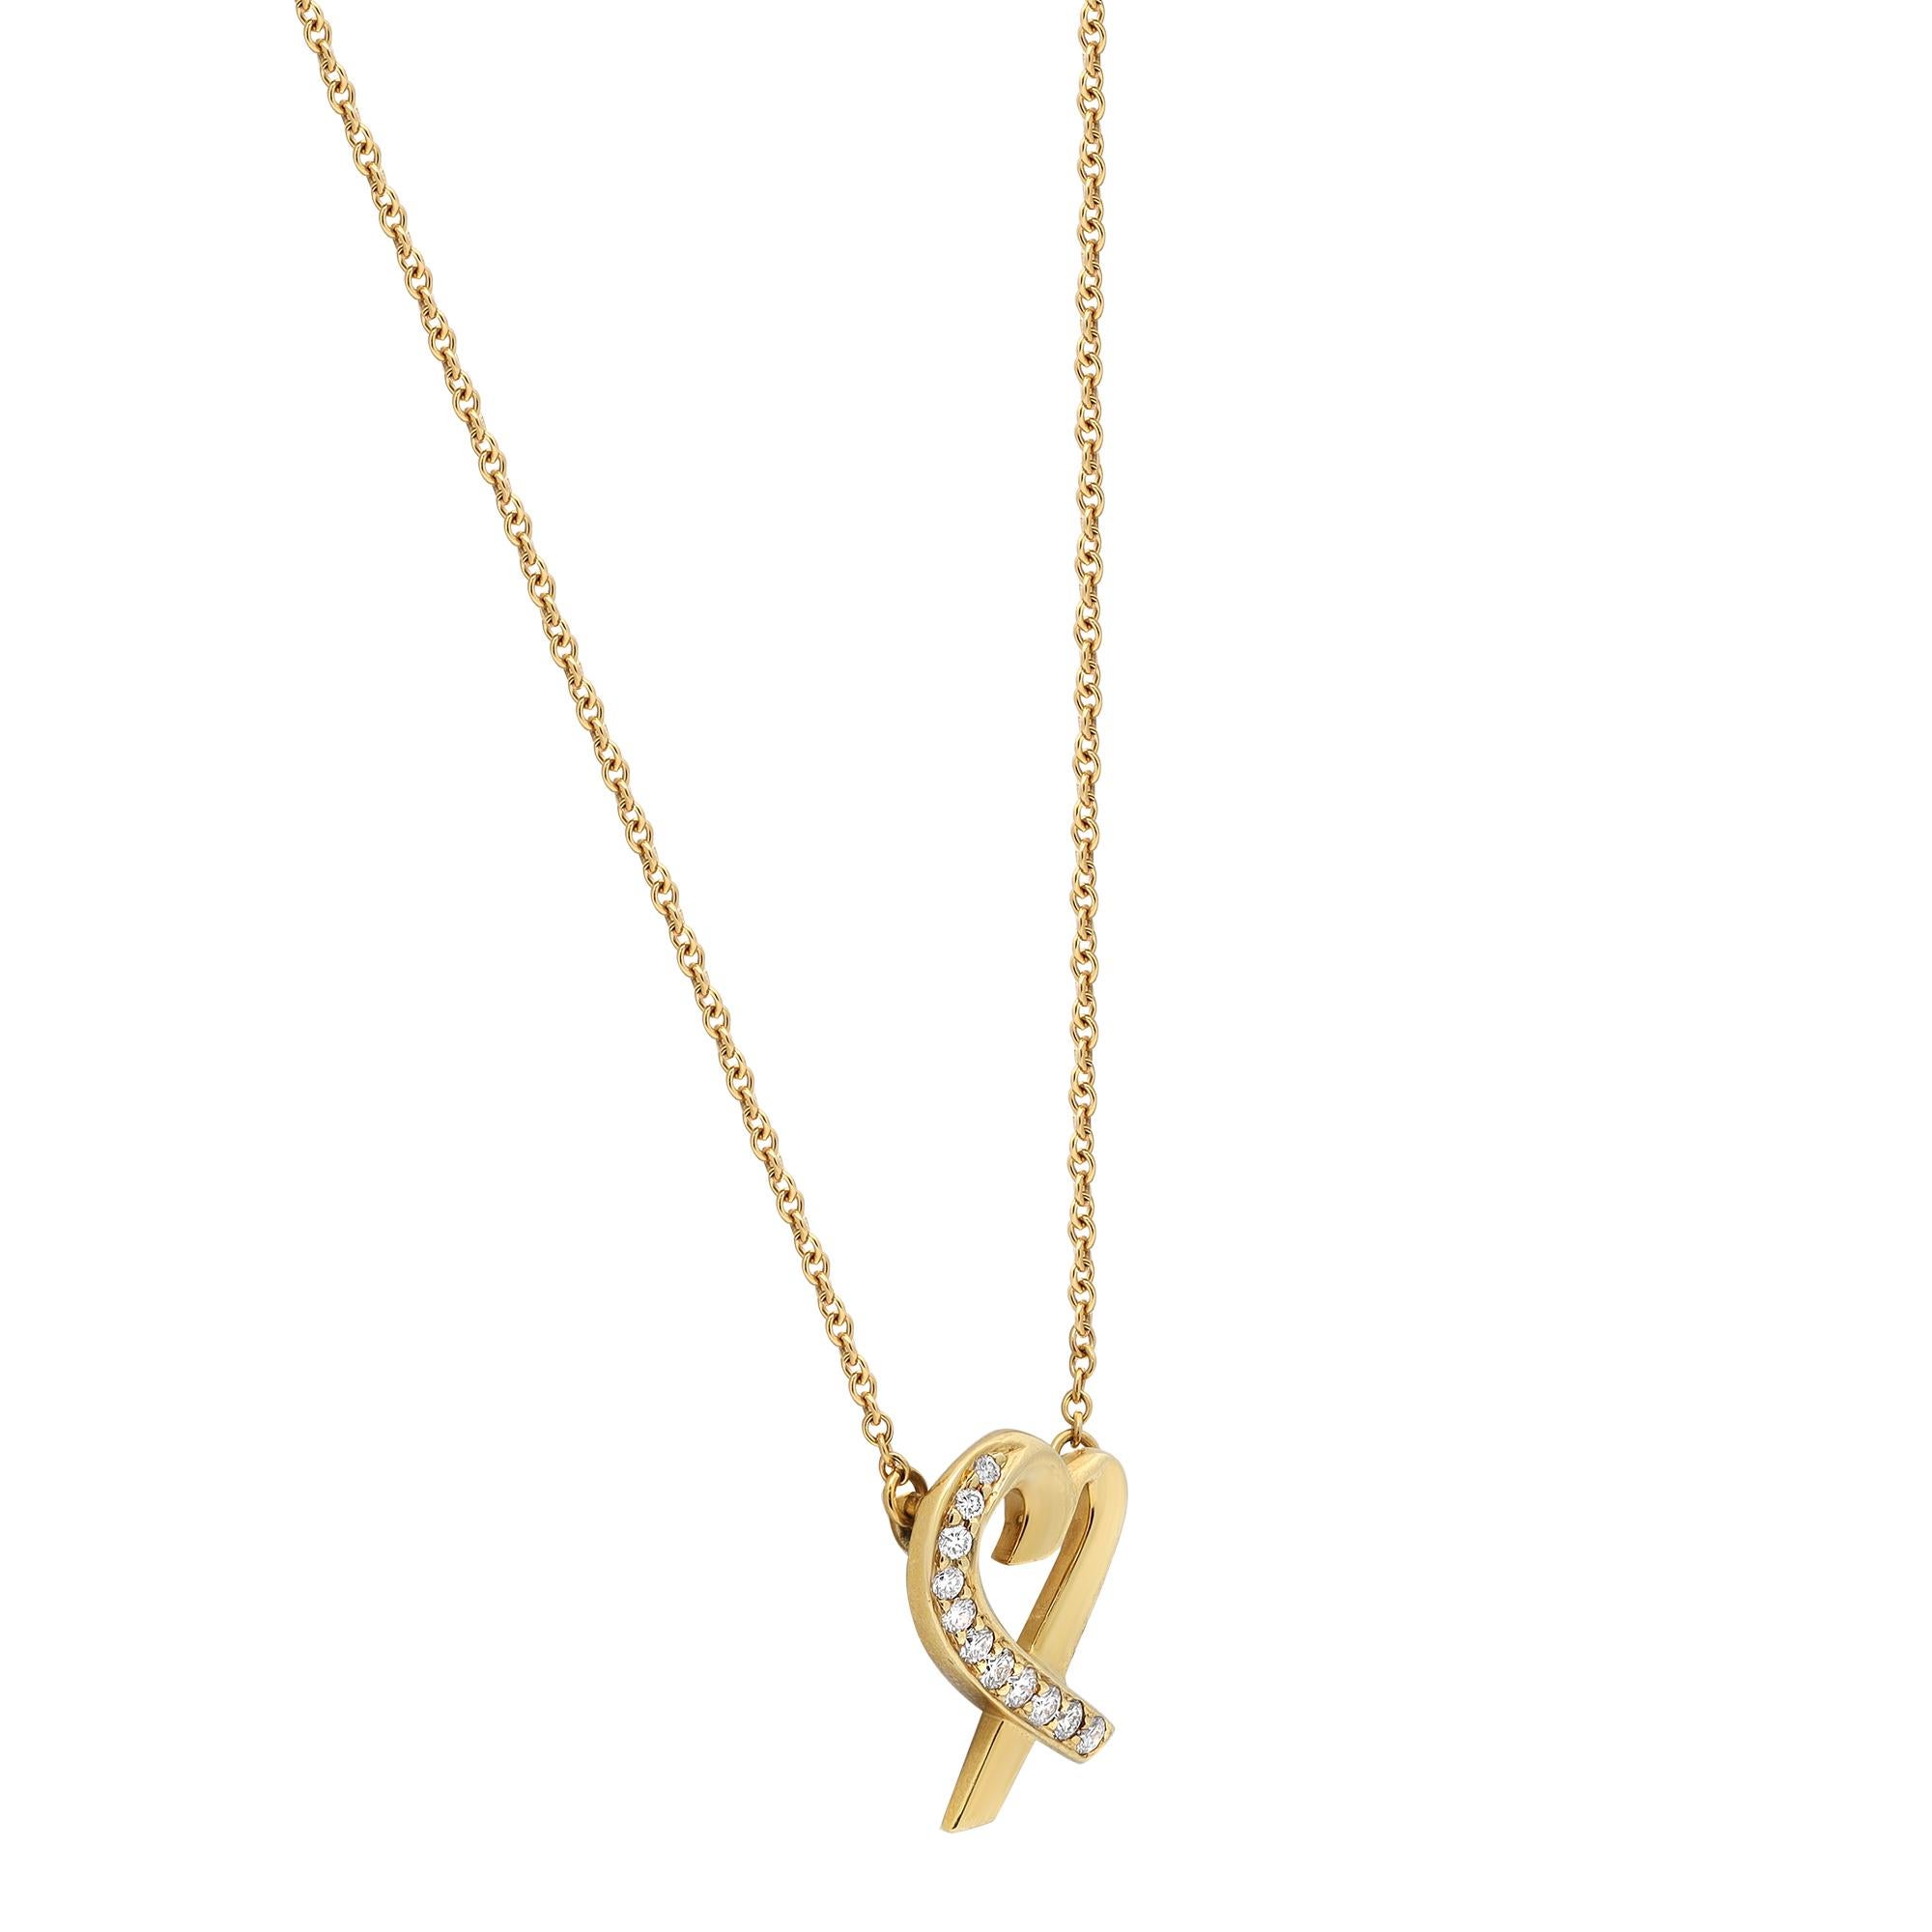 Tiffany & Co Paloma Picasso diamond heart pendant necklace. From the Loving Heart collection by the designer Paloma Picasso. This necklace features an open heart with nine pave set round brilliant cut diamonds weighing 0.10 carat encrusted on one